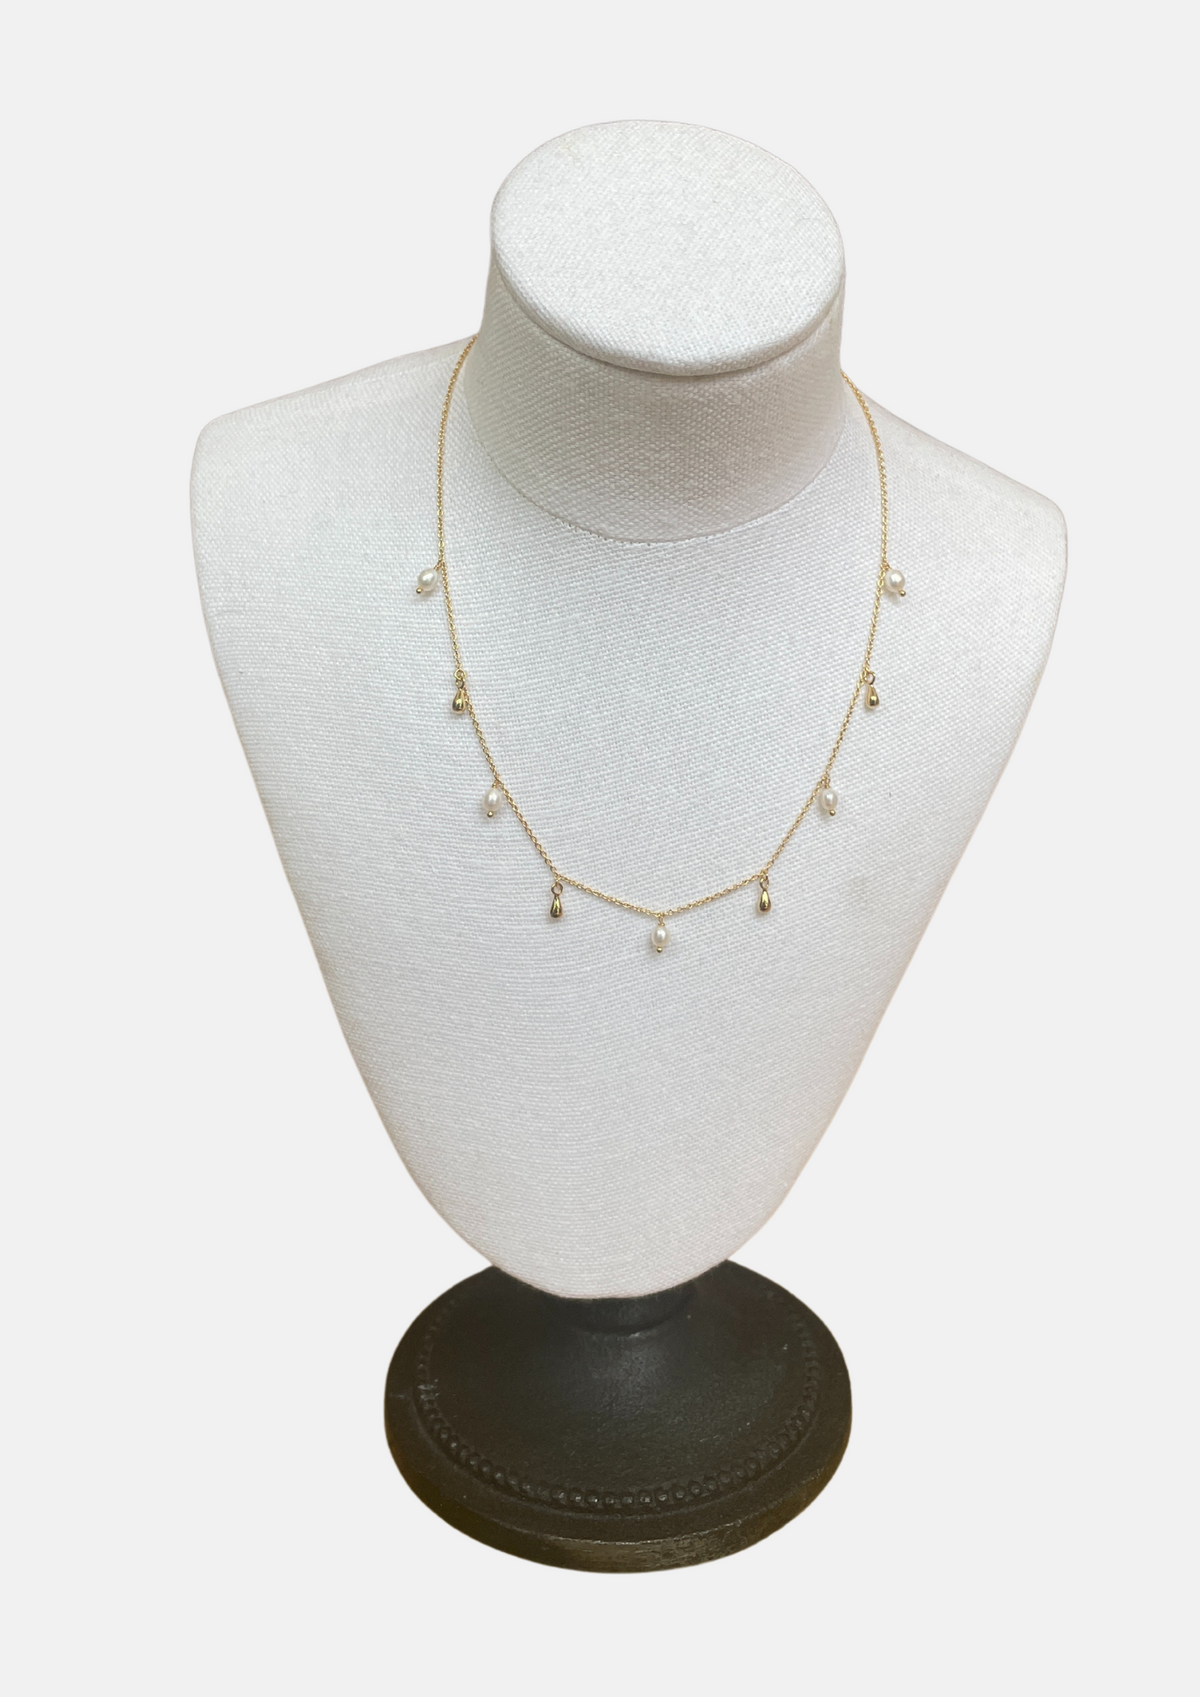 Choker necklace with gold plated chain and small pearl pendantsPearl and gold drop detail necklace